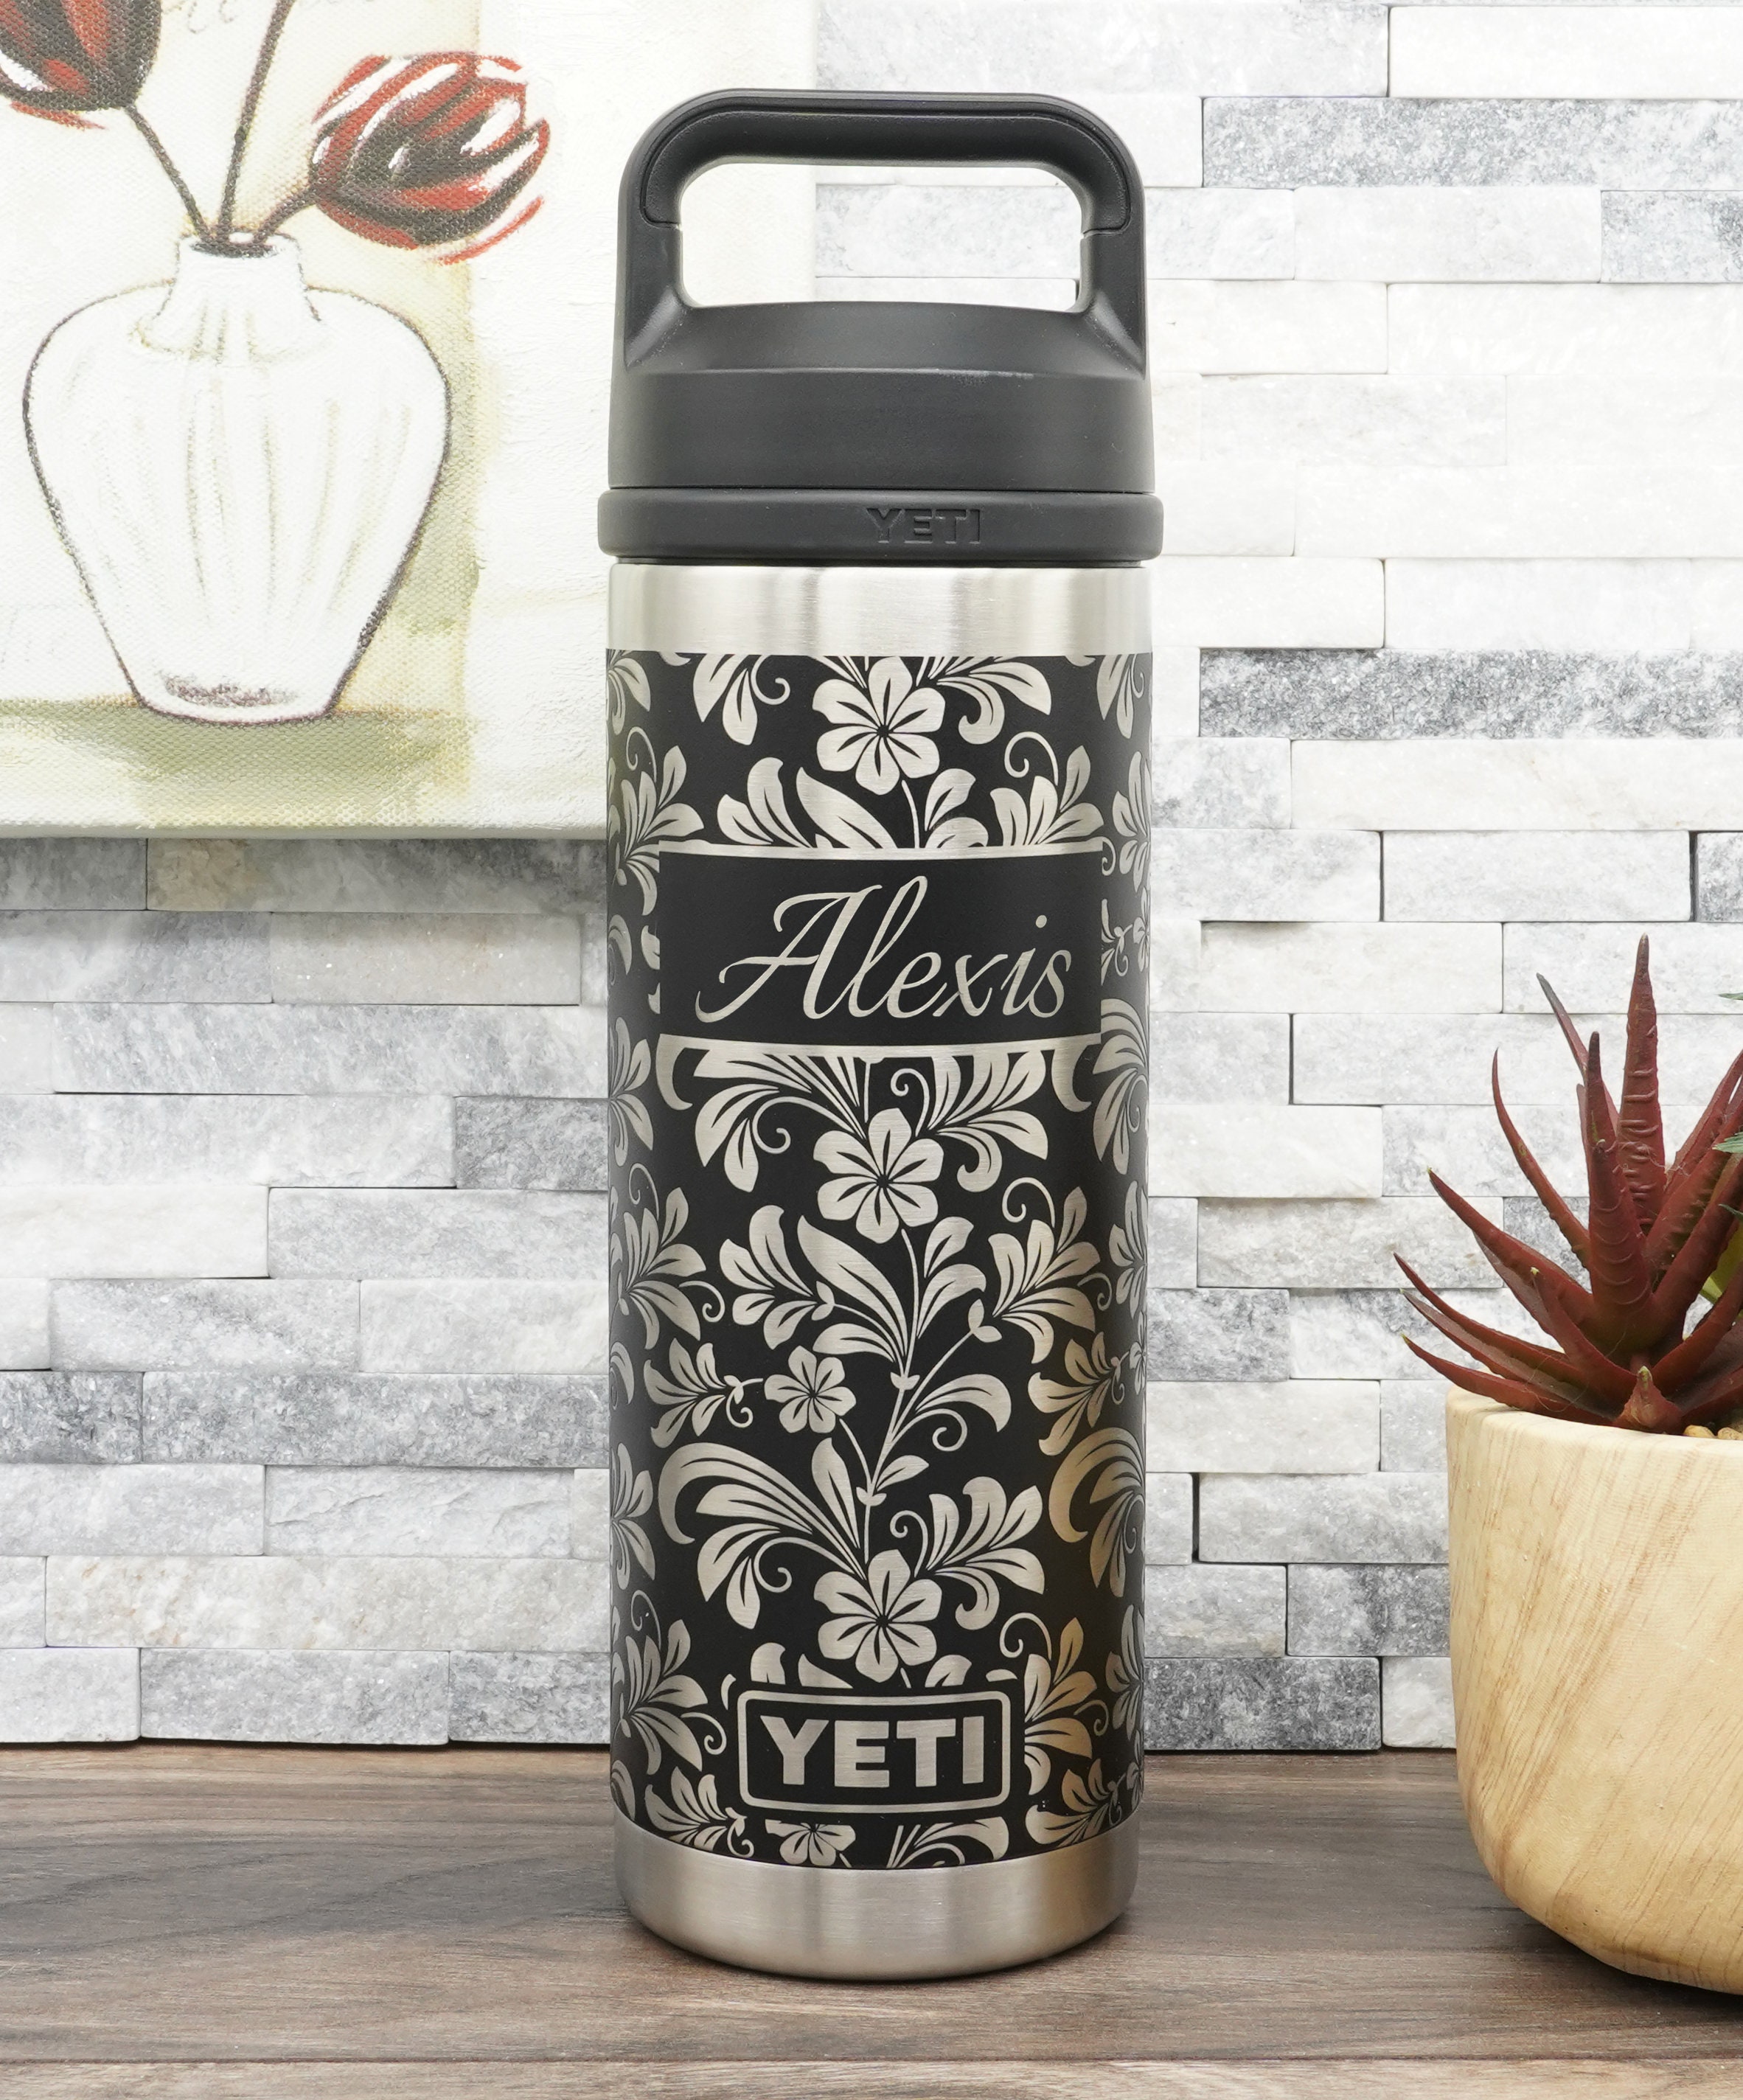 Laser Engraved YETI® or Polar Camel Water Bottle with Toolbox Diamond